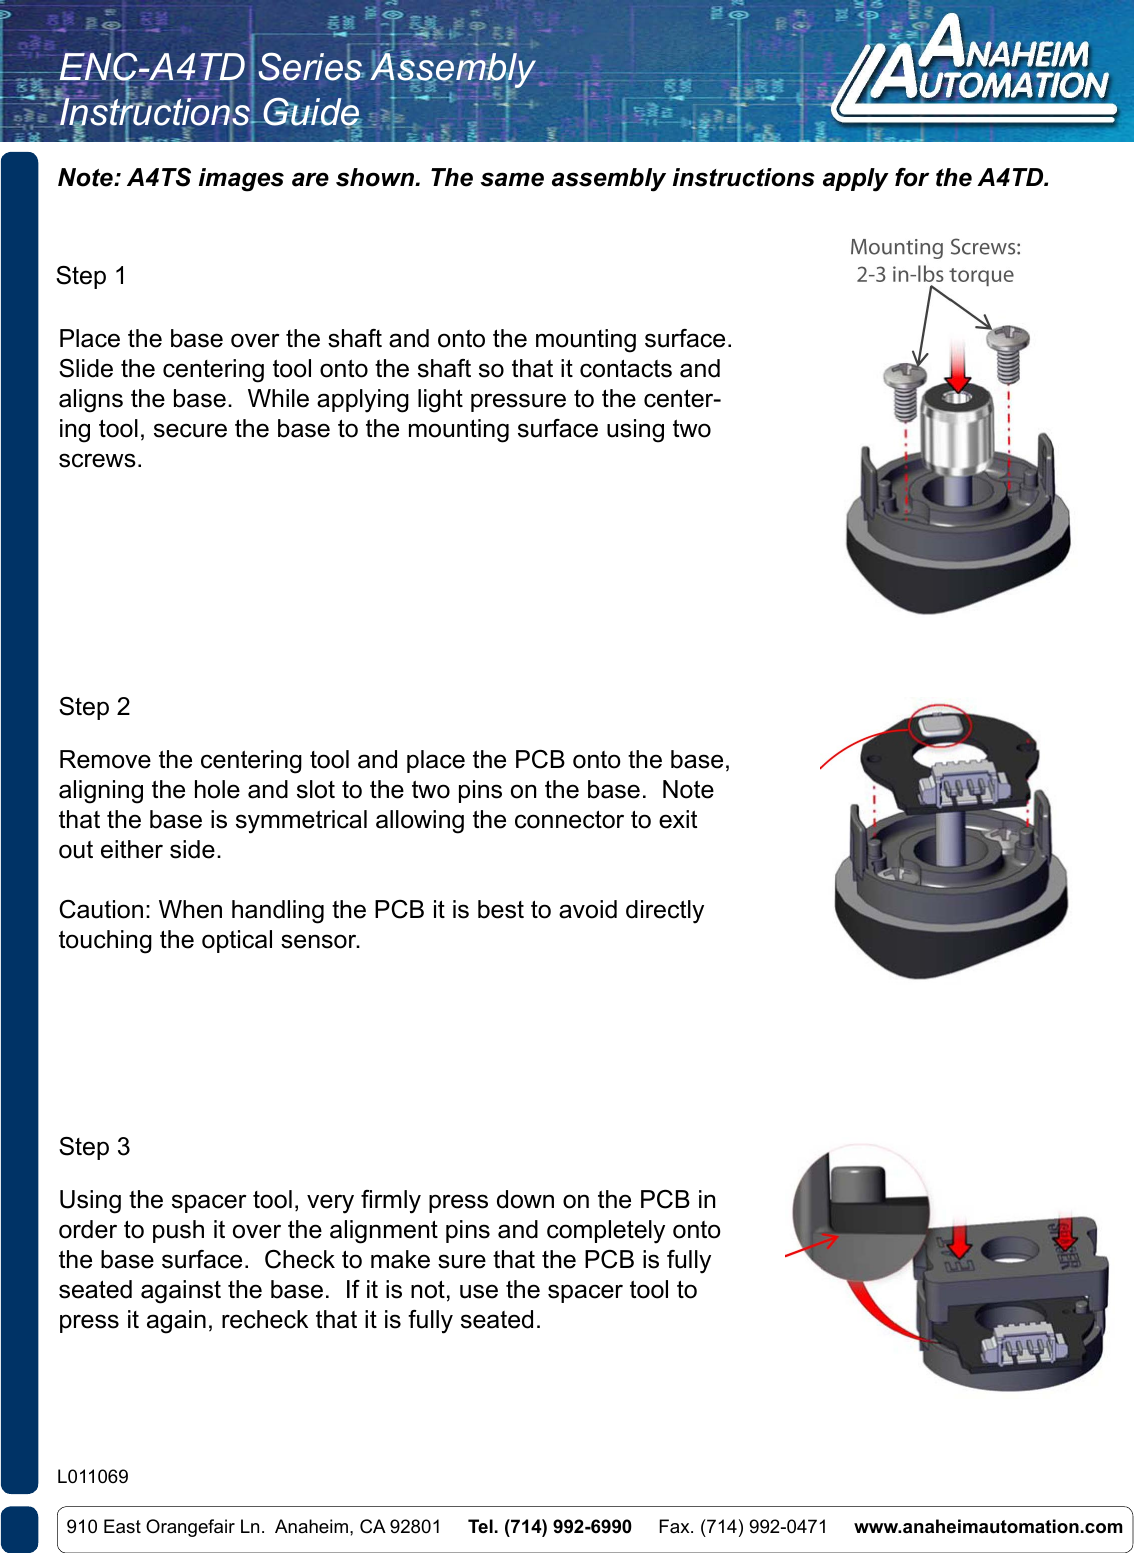 Page 1 of 2 - L011069 - ENC-A4TD Series Assembly Instructions